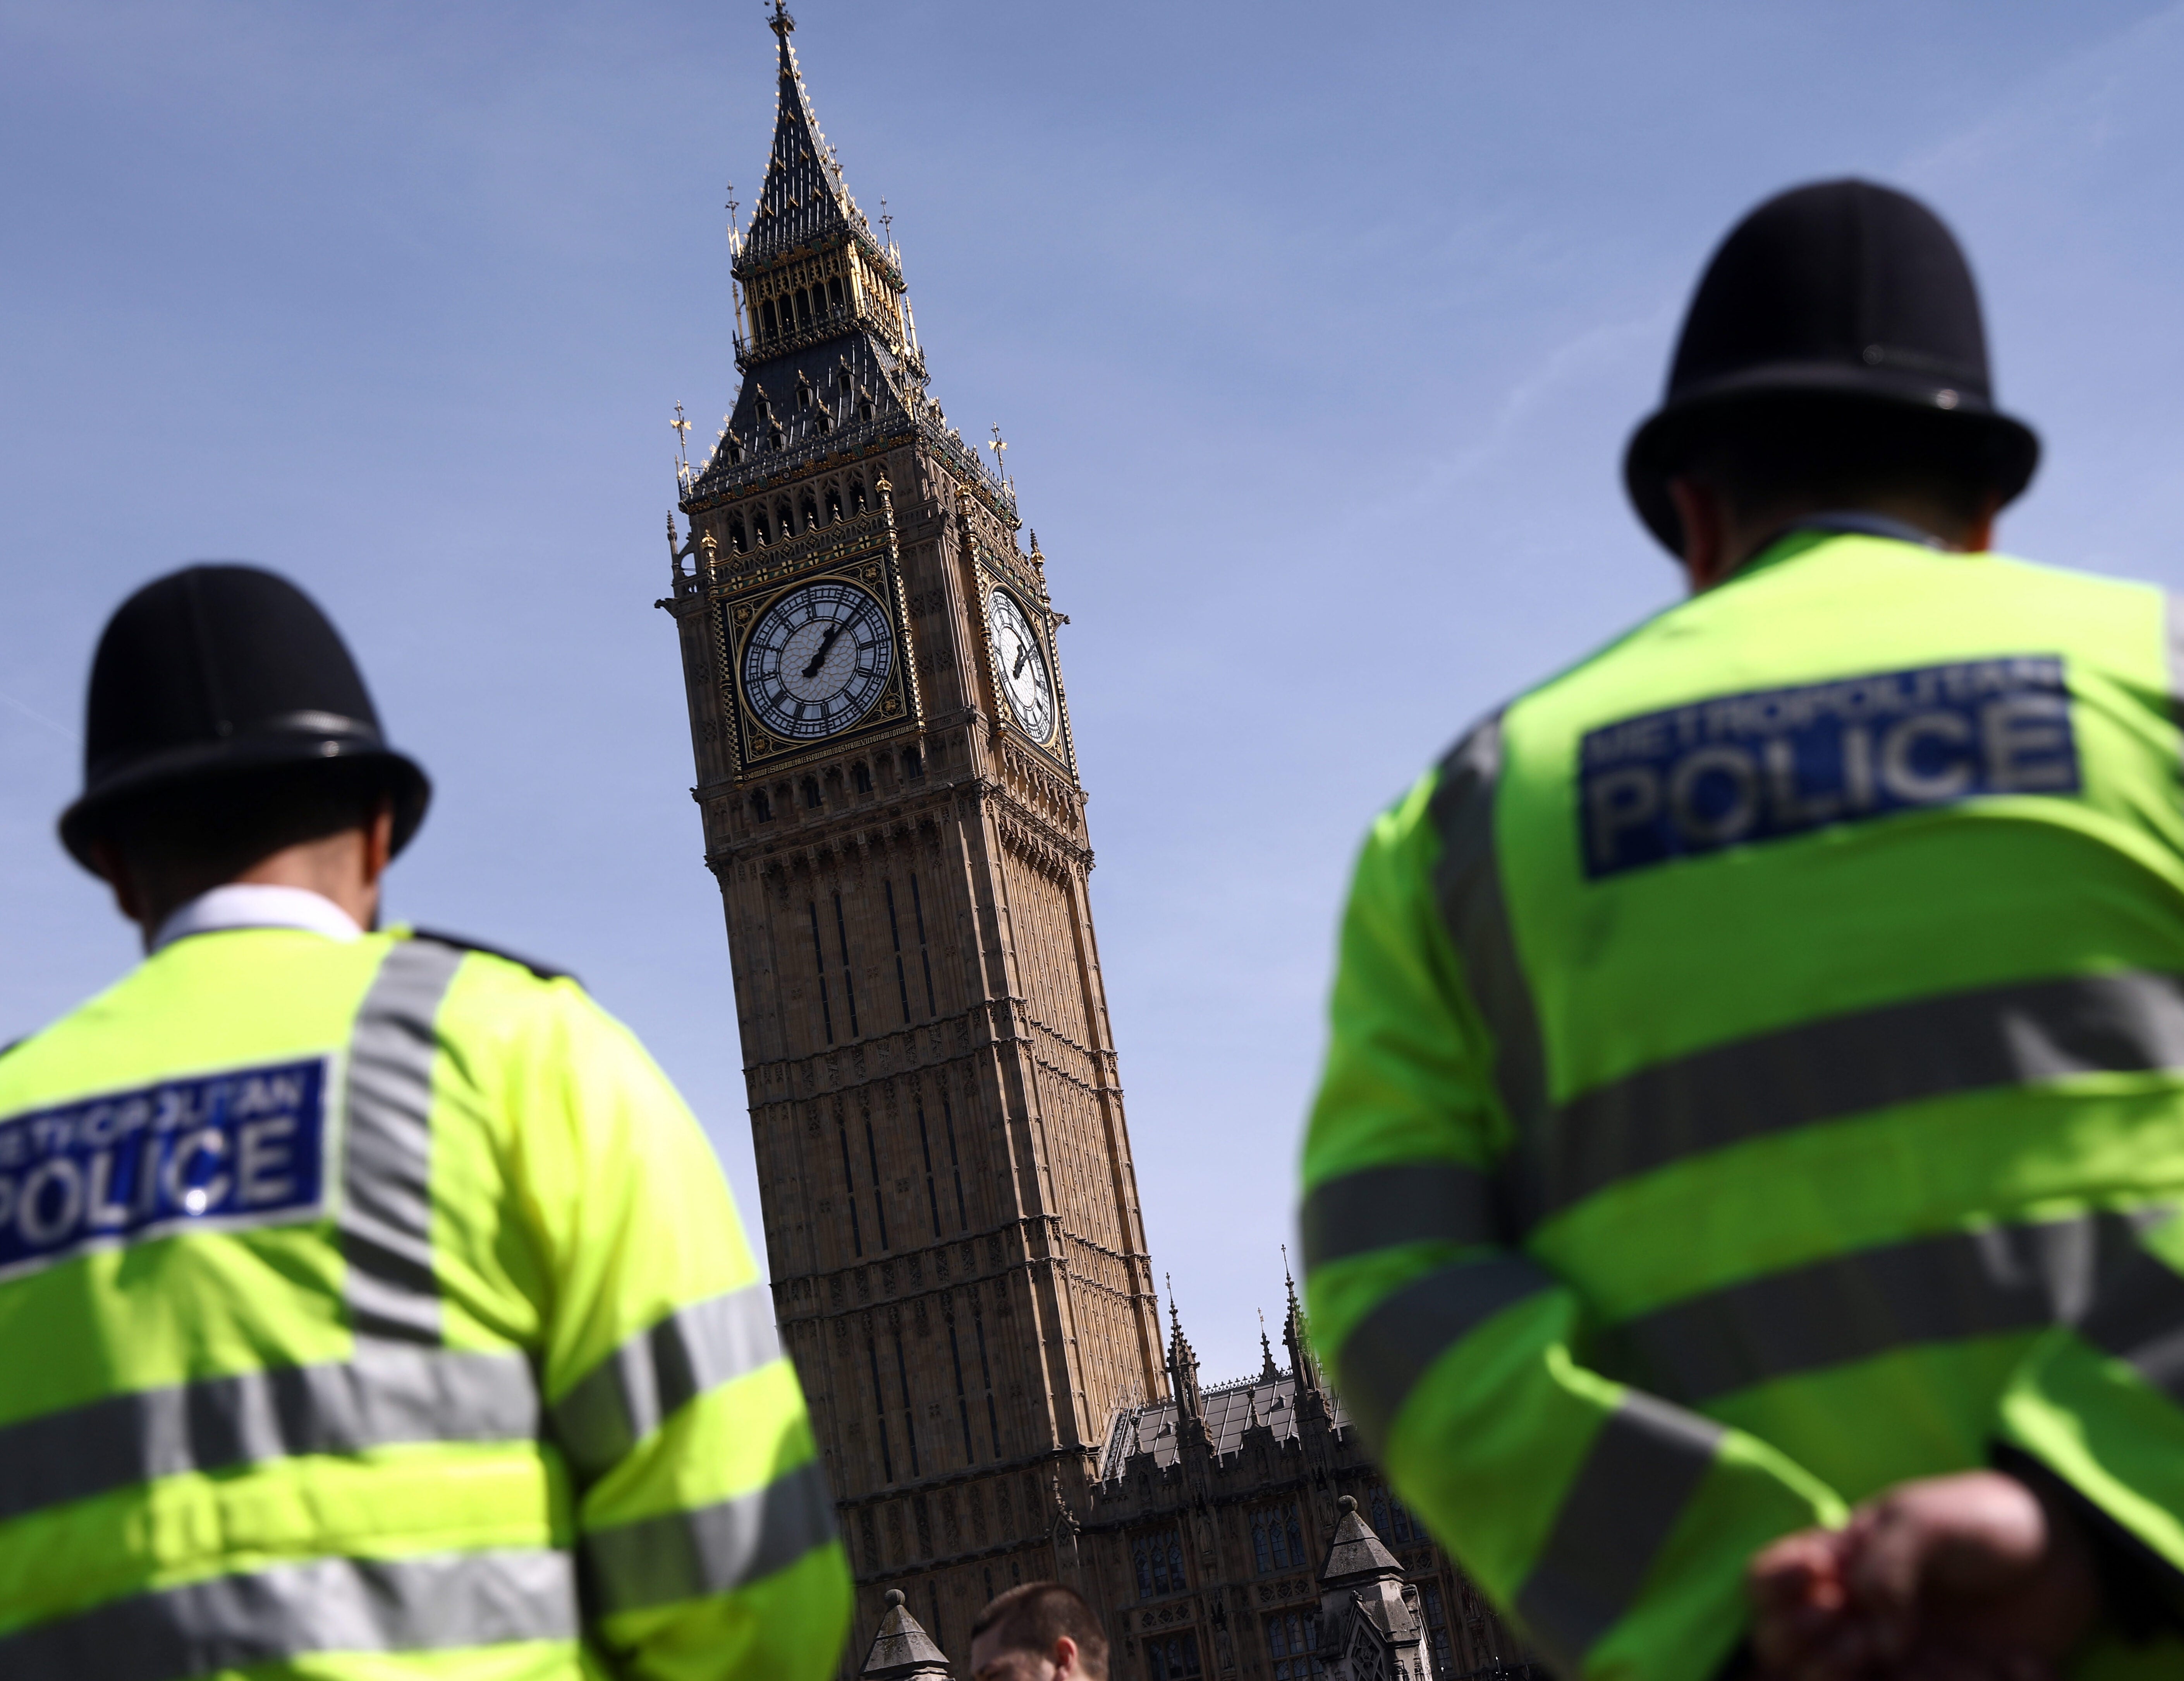 Why the Tory MP arrested on suspicion of rape has not been named in the media